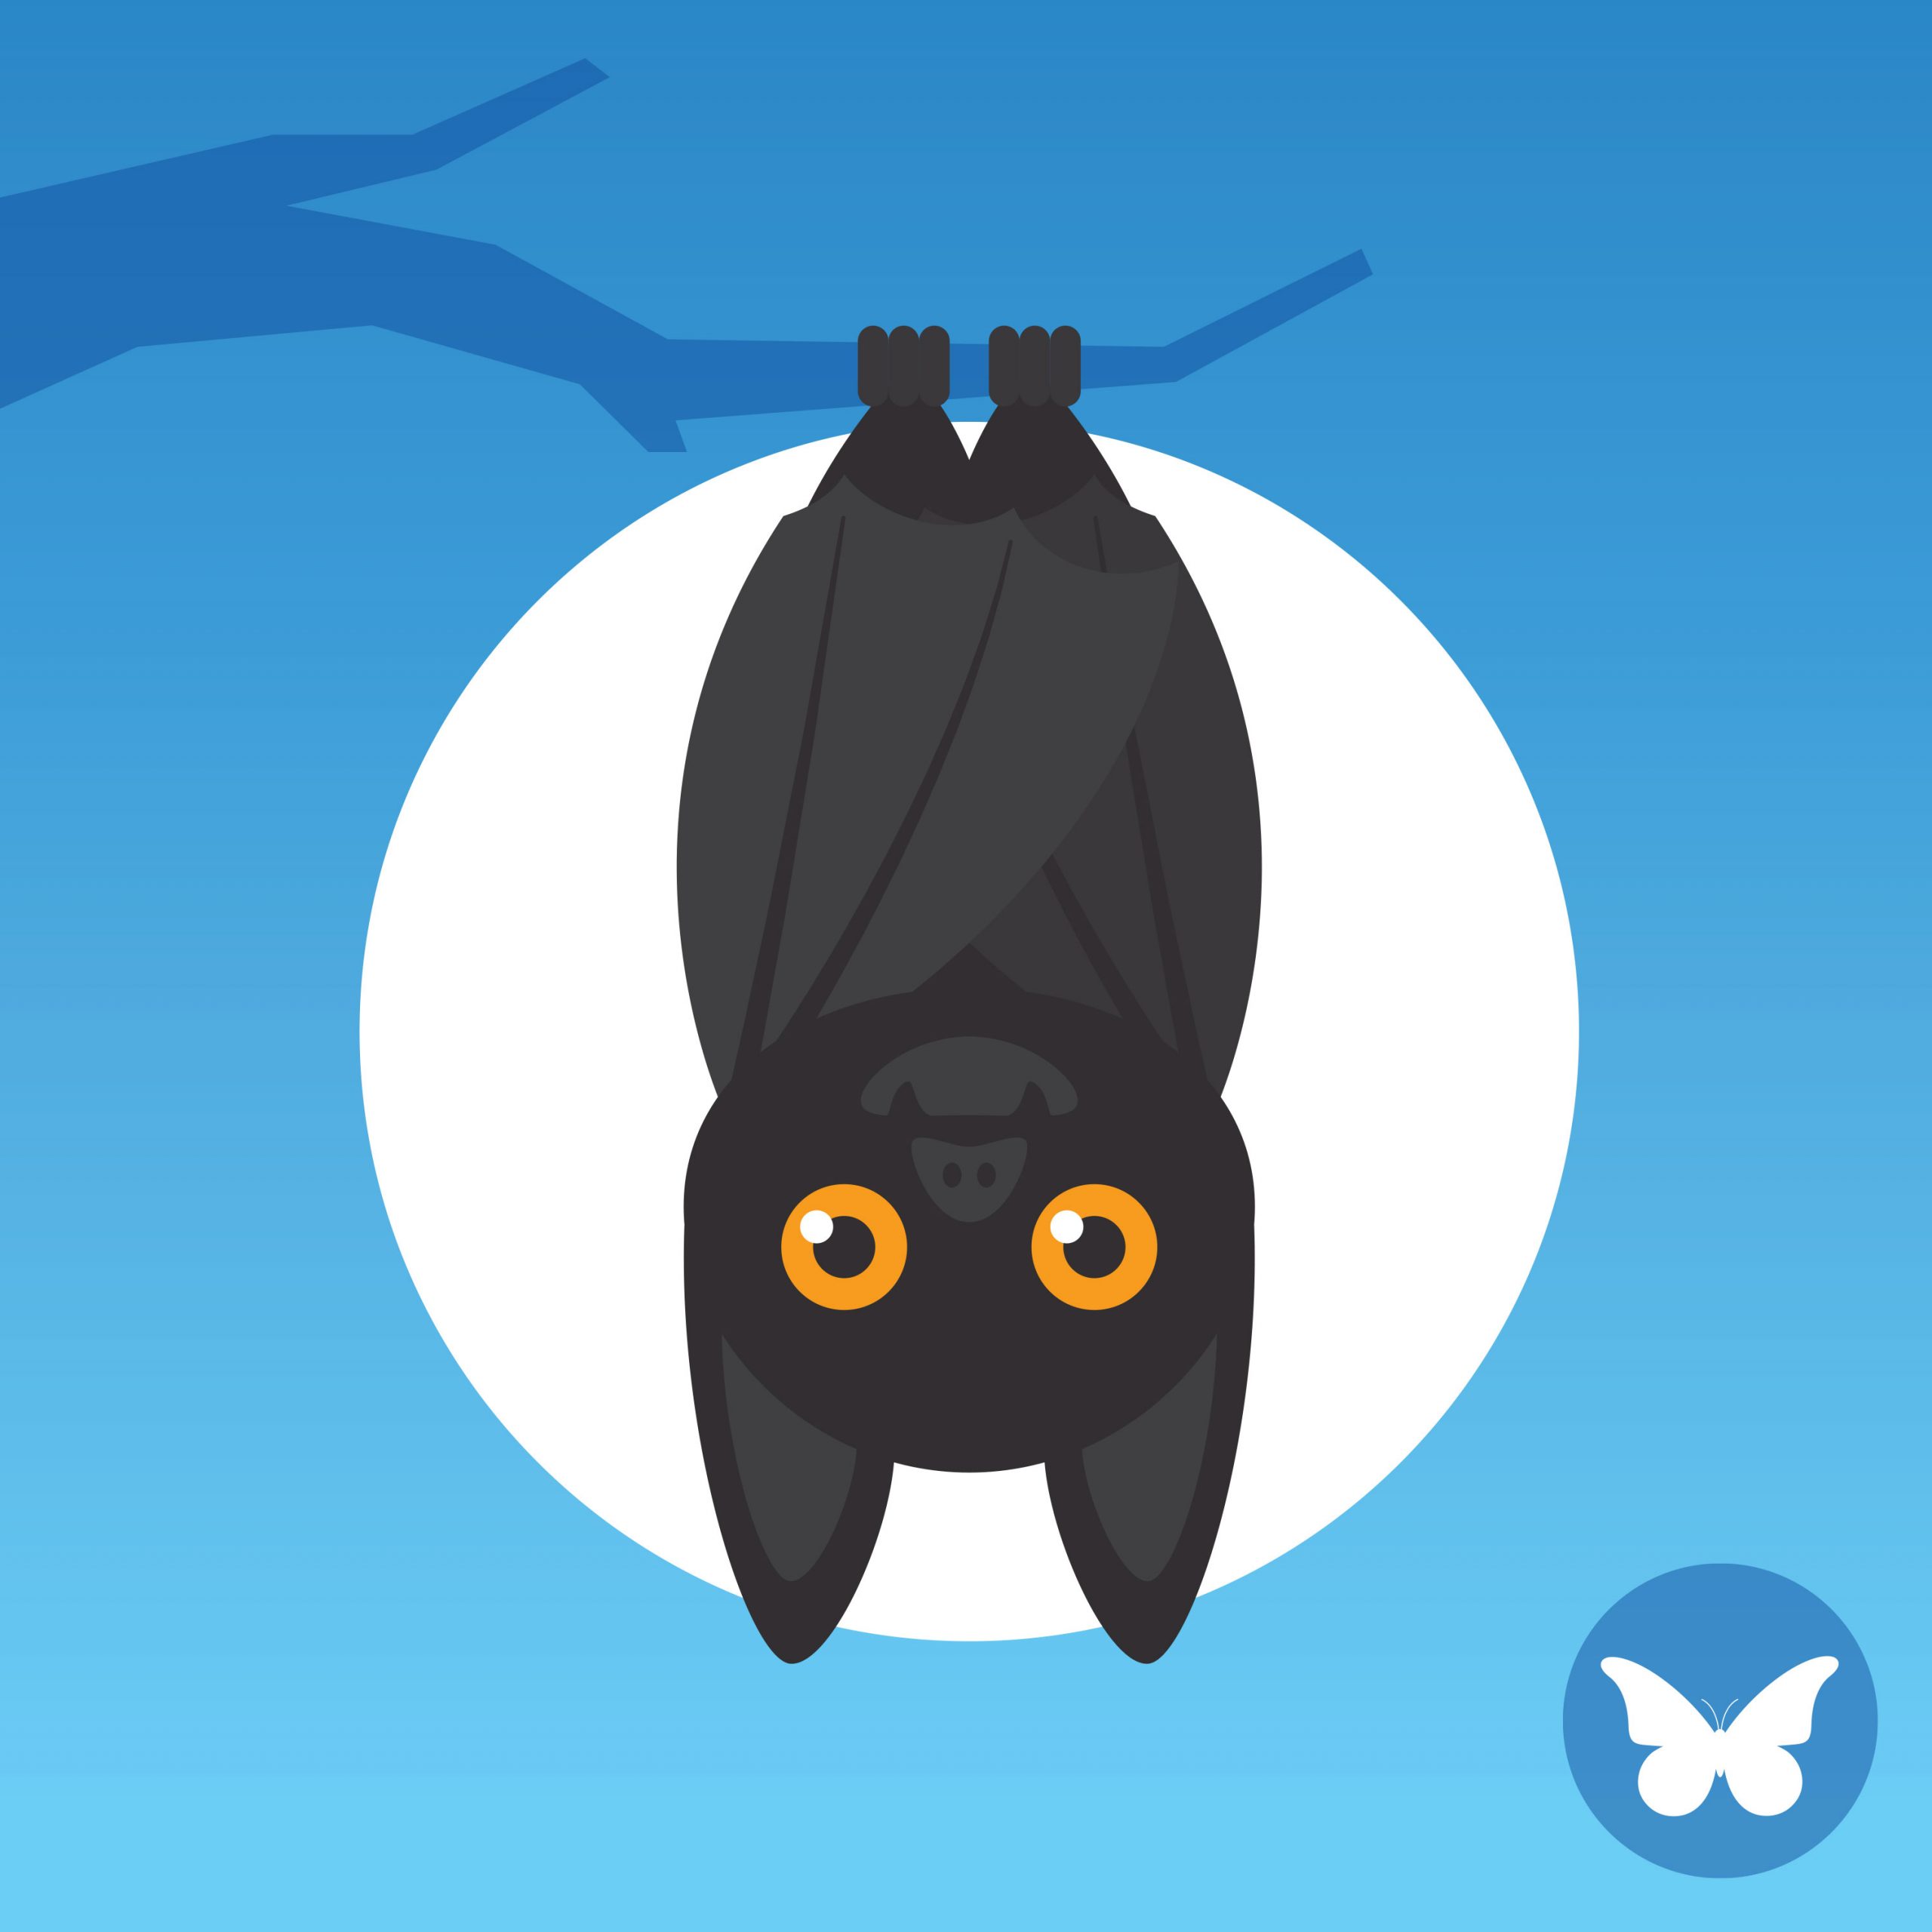 Illustration of a bat hanging upside down from a tree branch with a blue background.